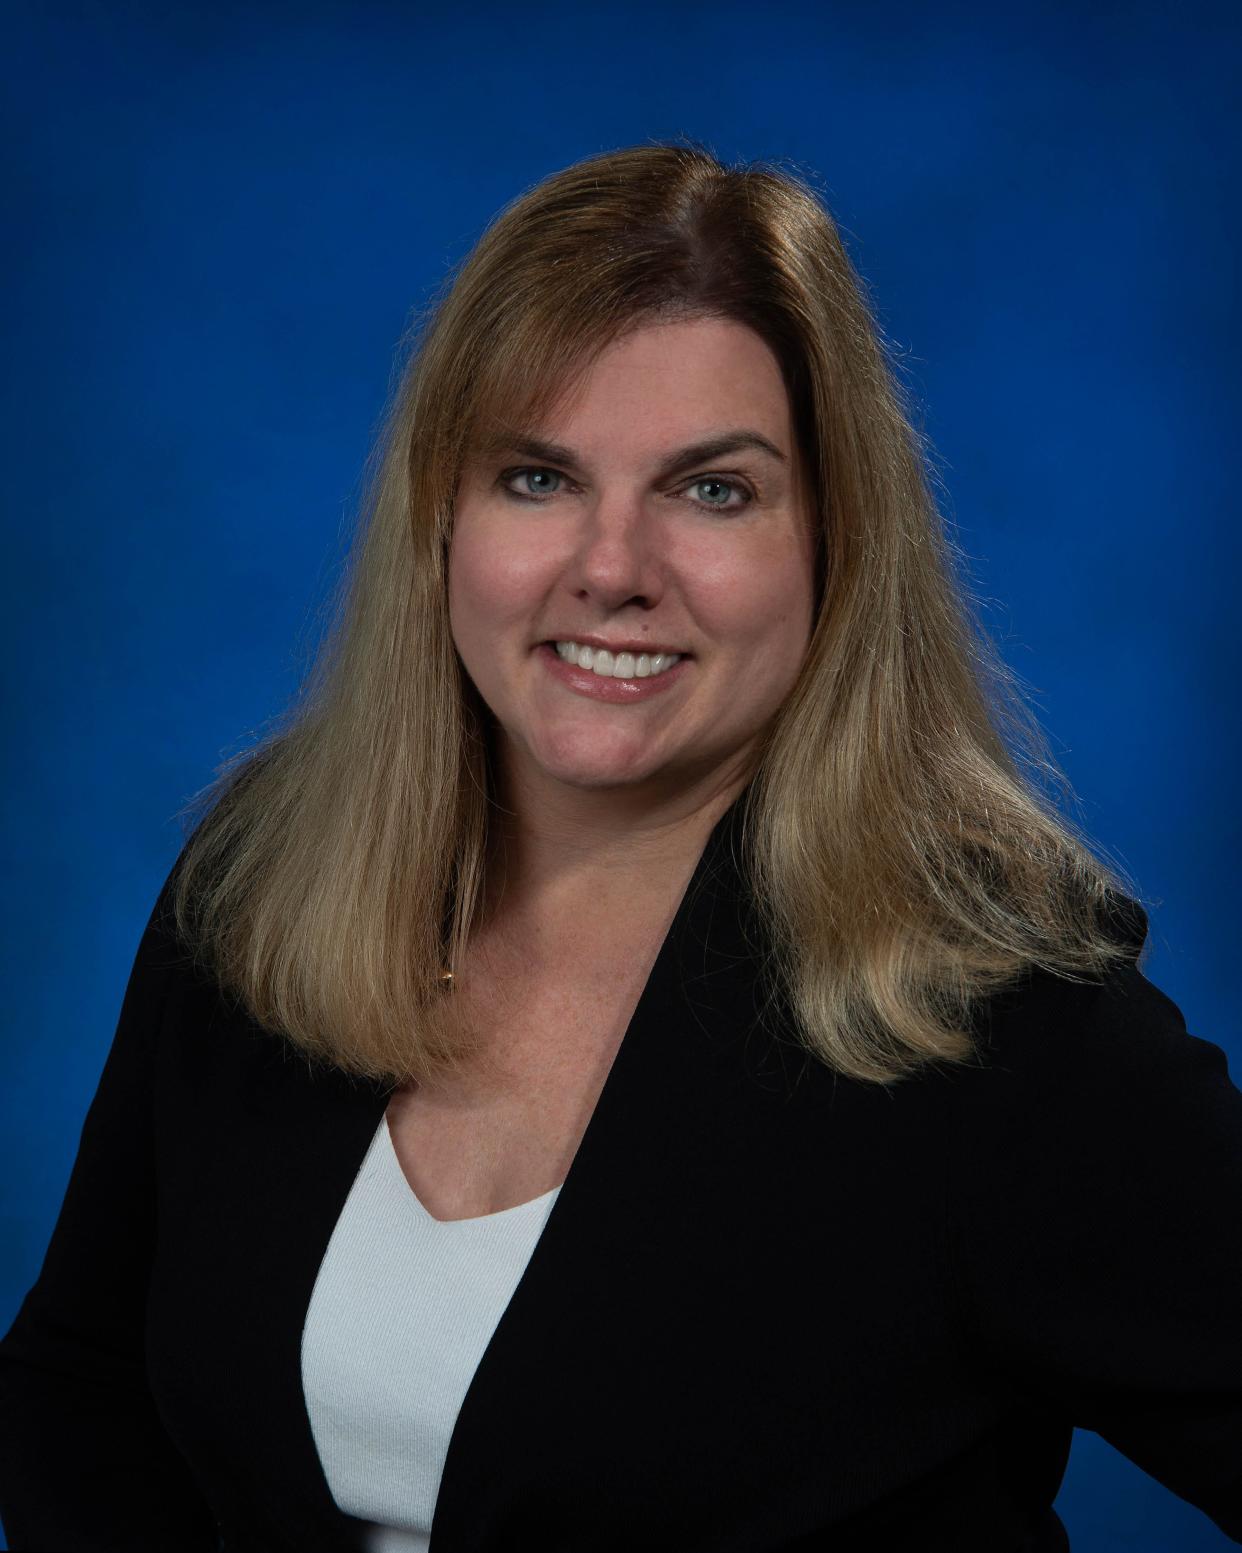 Kathleen Amm has been named the new director of the National High Magnetic Field Laboratory headquartered at Florida State University.